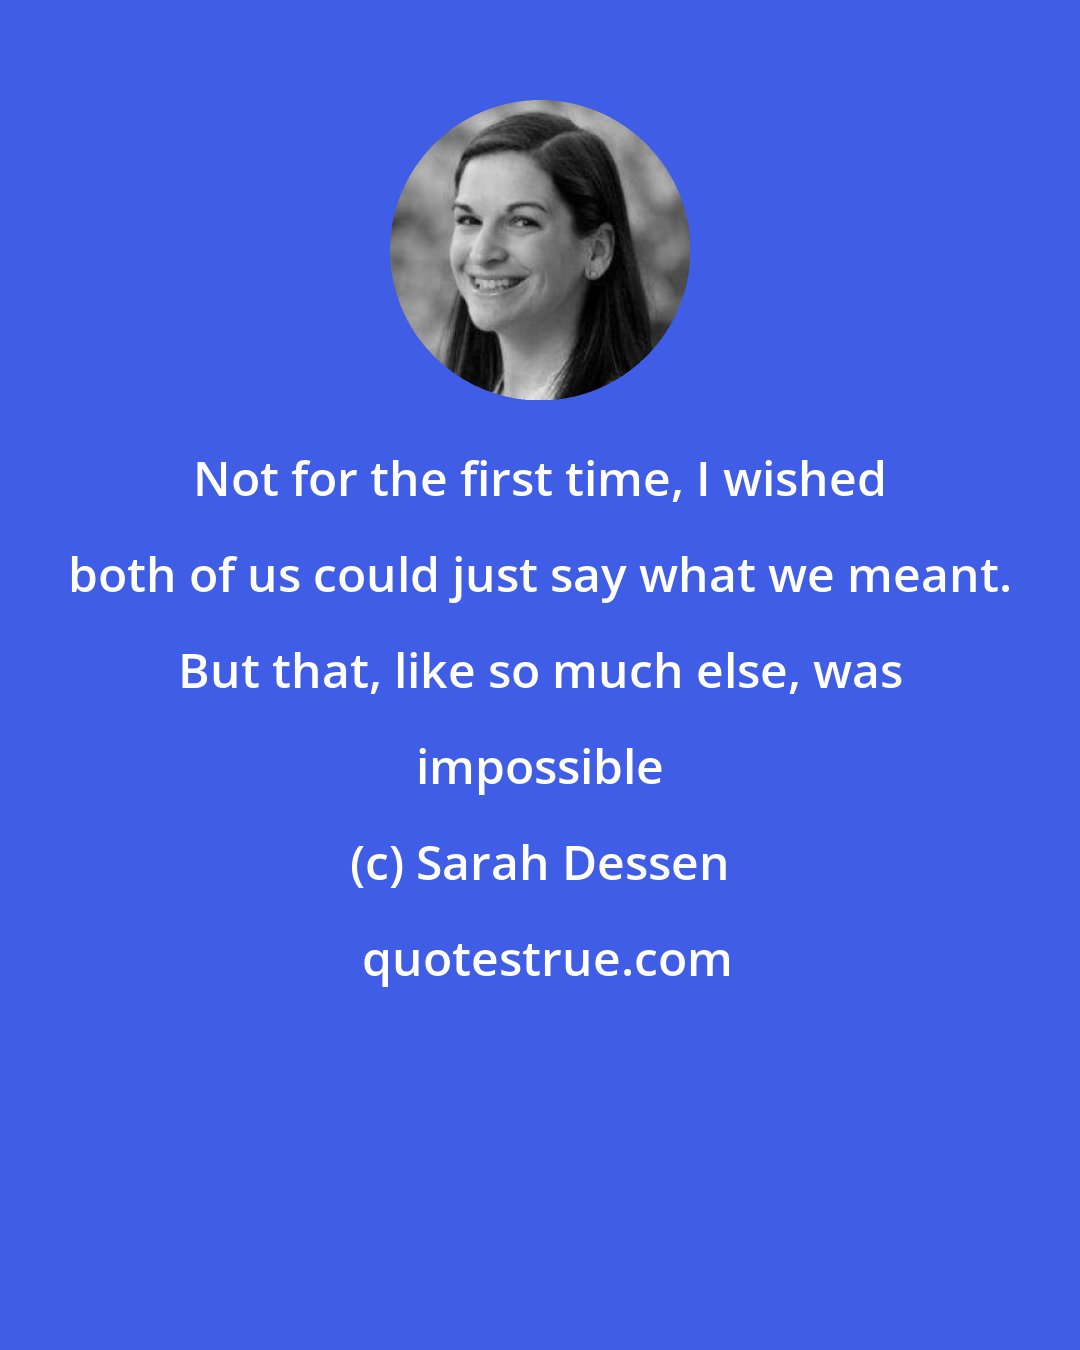 Sarah Dessen: Not for the first time, I wished both of us could just say what we meant. But that, like so much else, was impossible